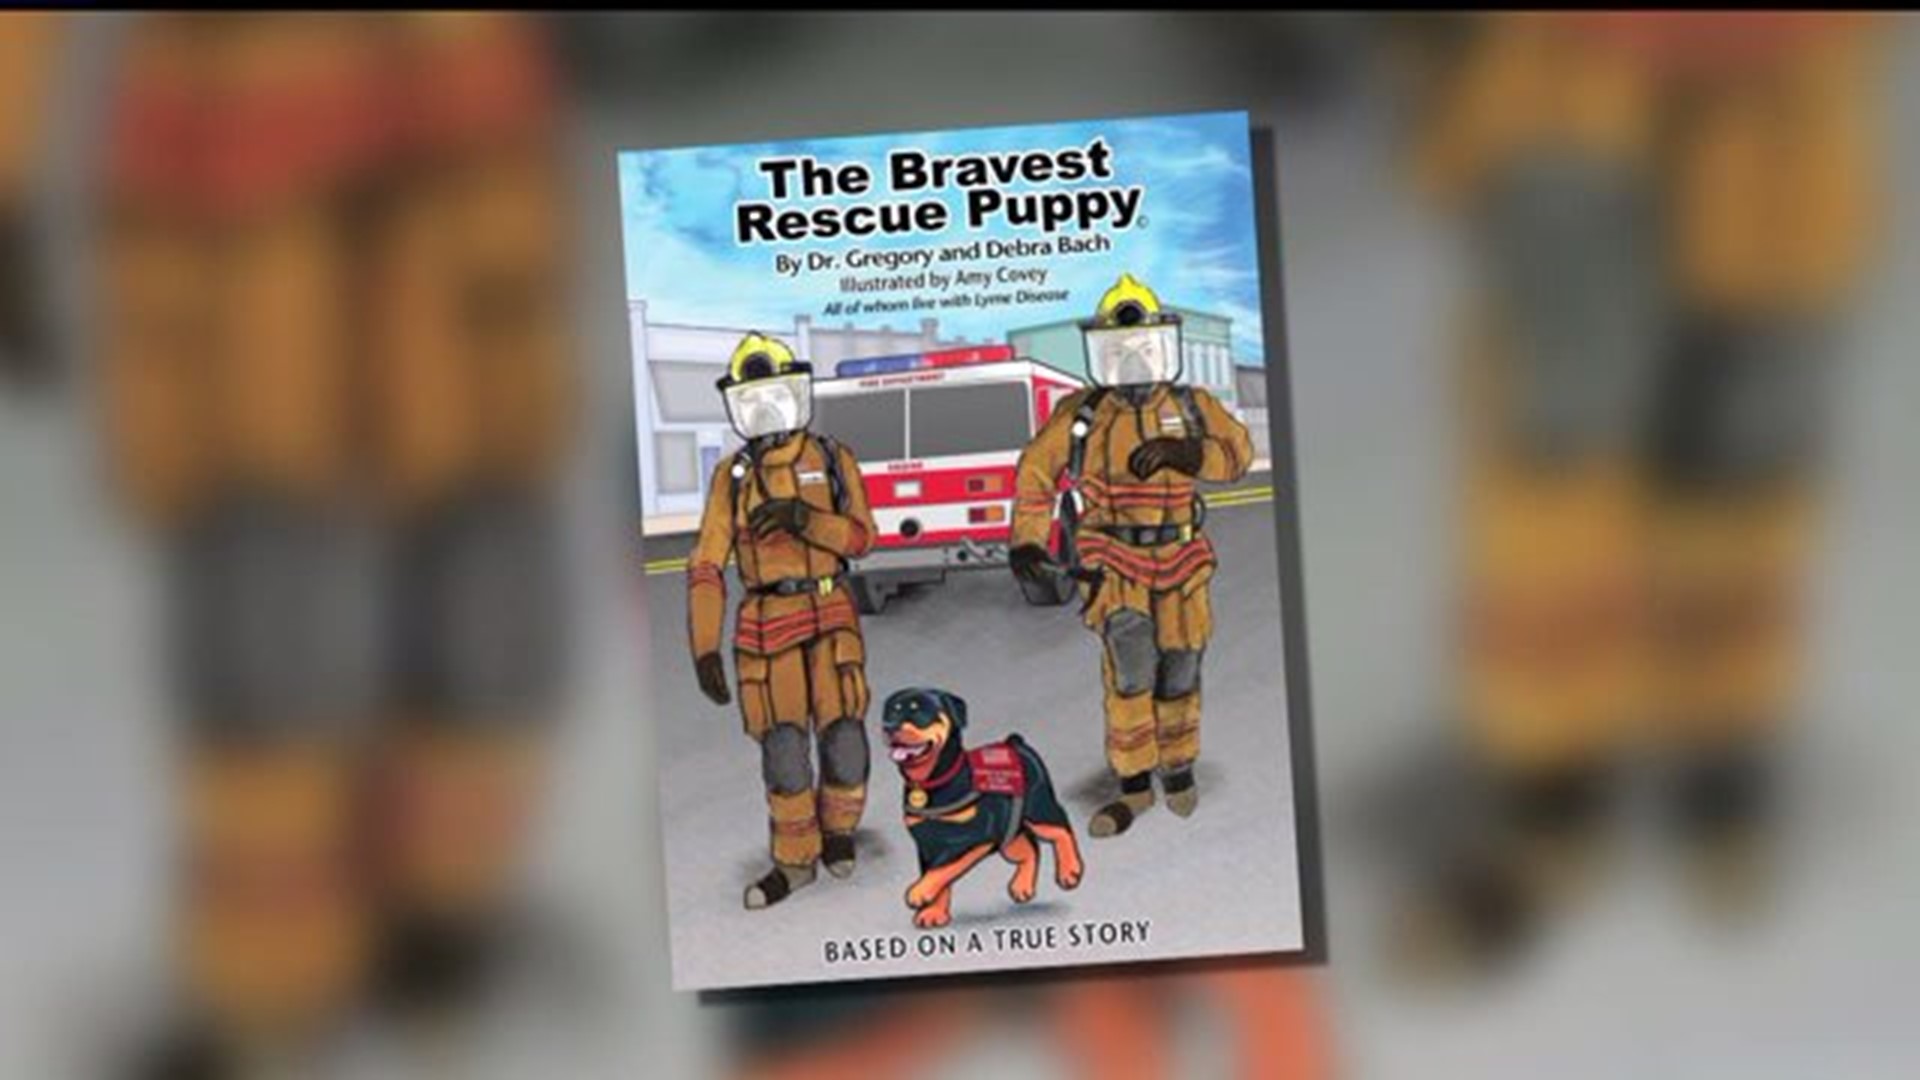 Authors of "The Bravest Rescue Puppy" help raise money for lyme disease research